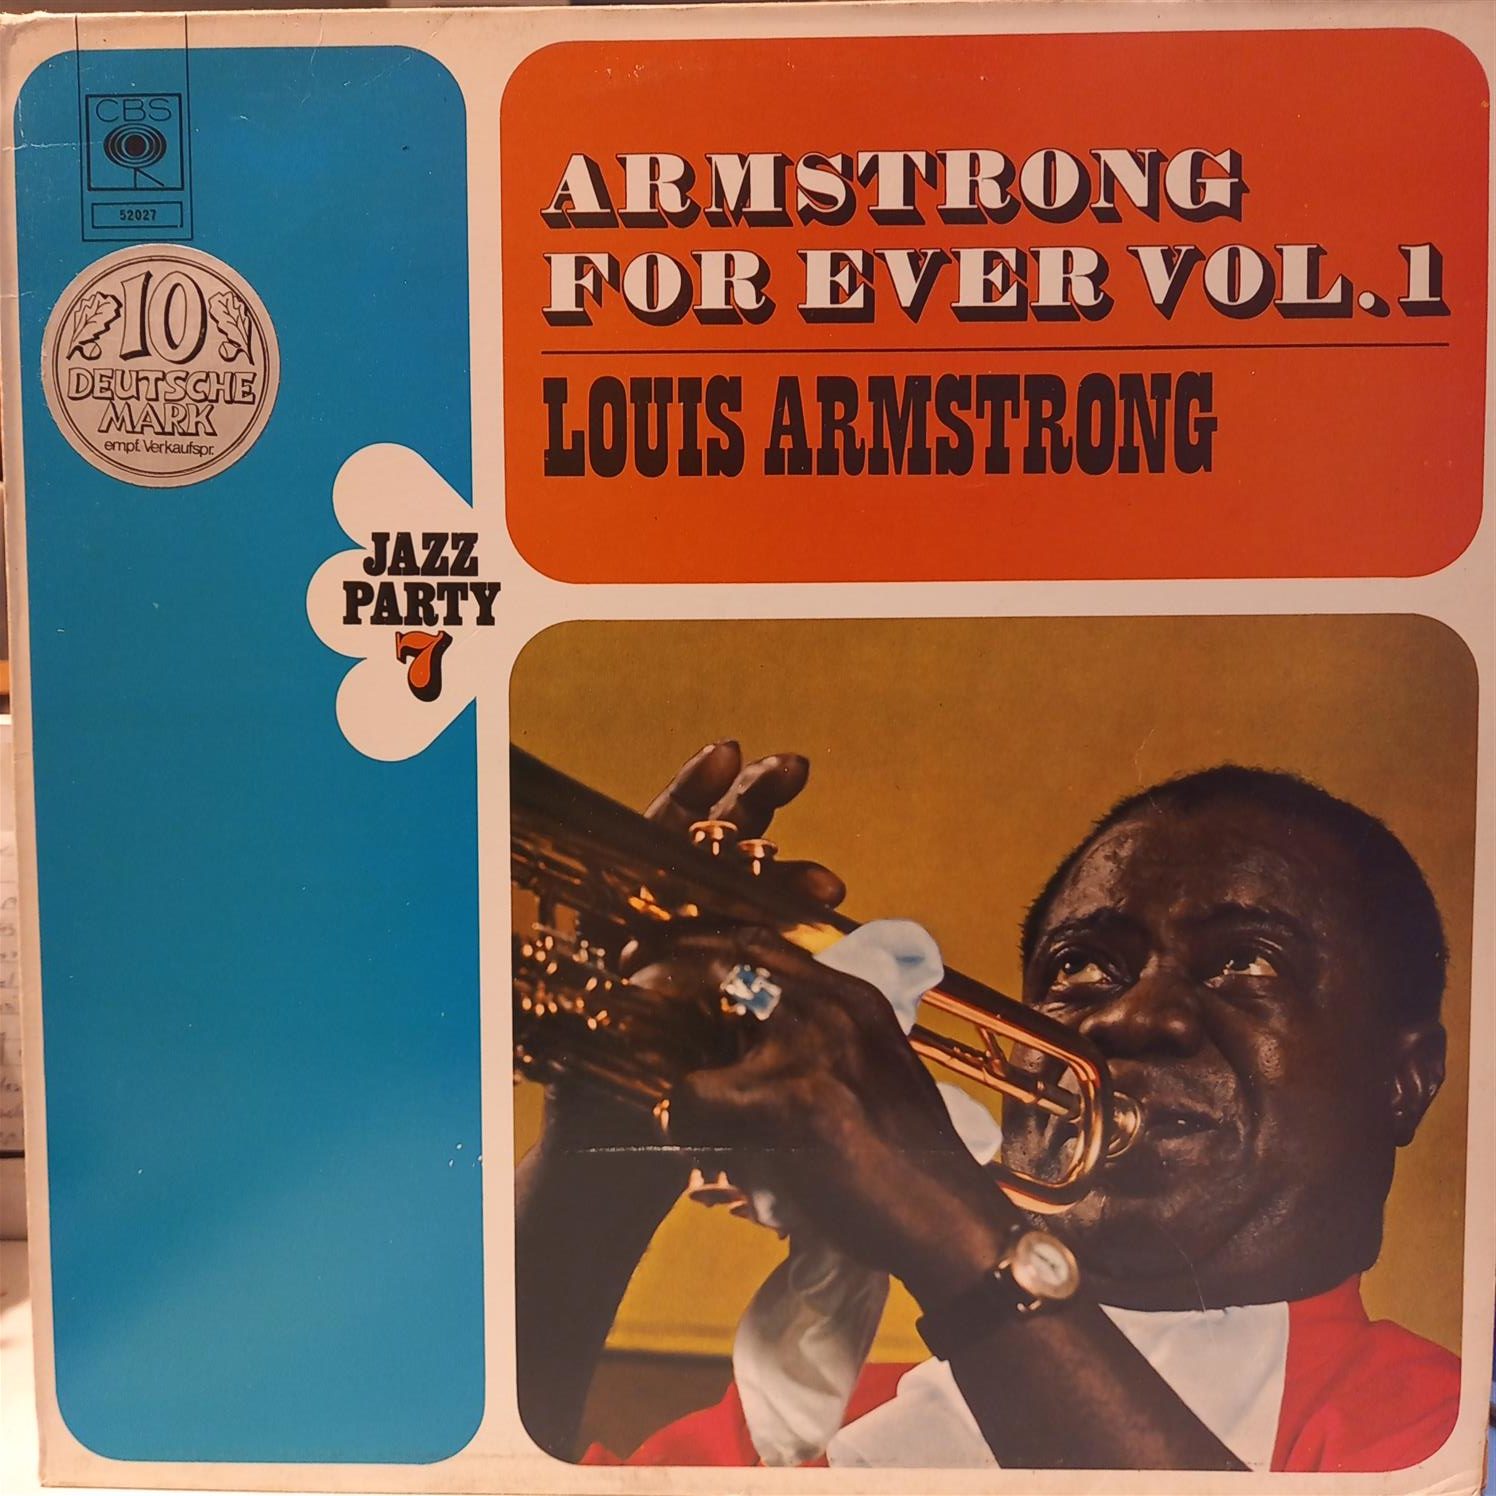 LOUIS ARMSTRONG – ARMSTRONG FOR EVER VOL. 1 ON